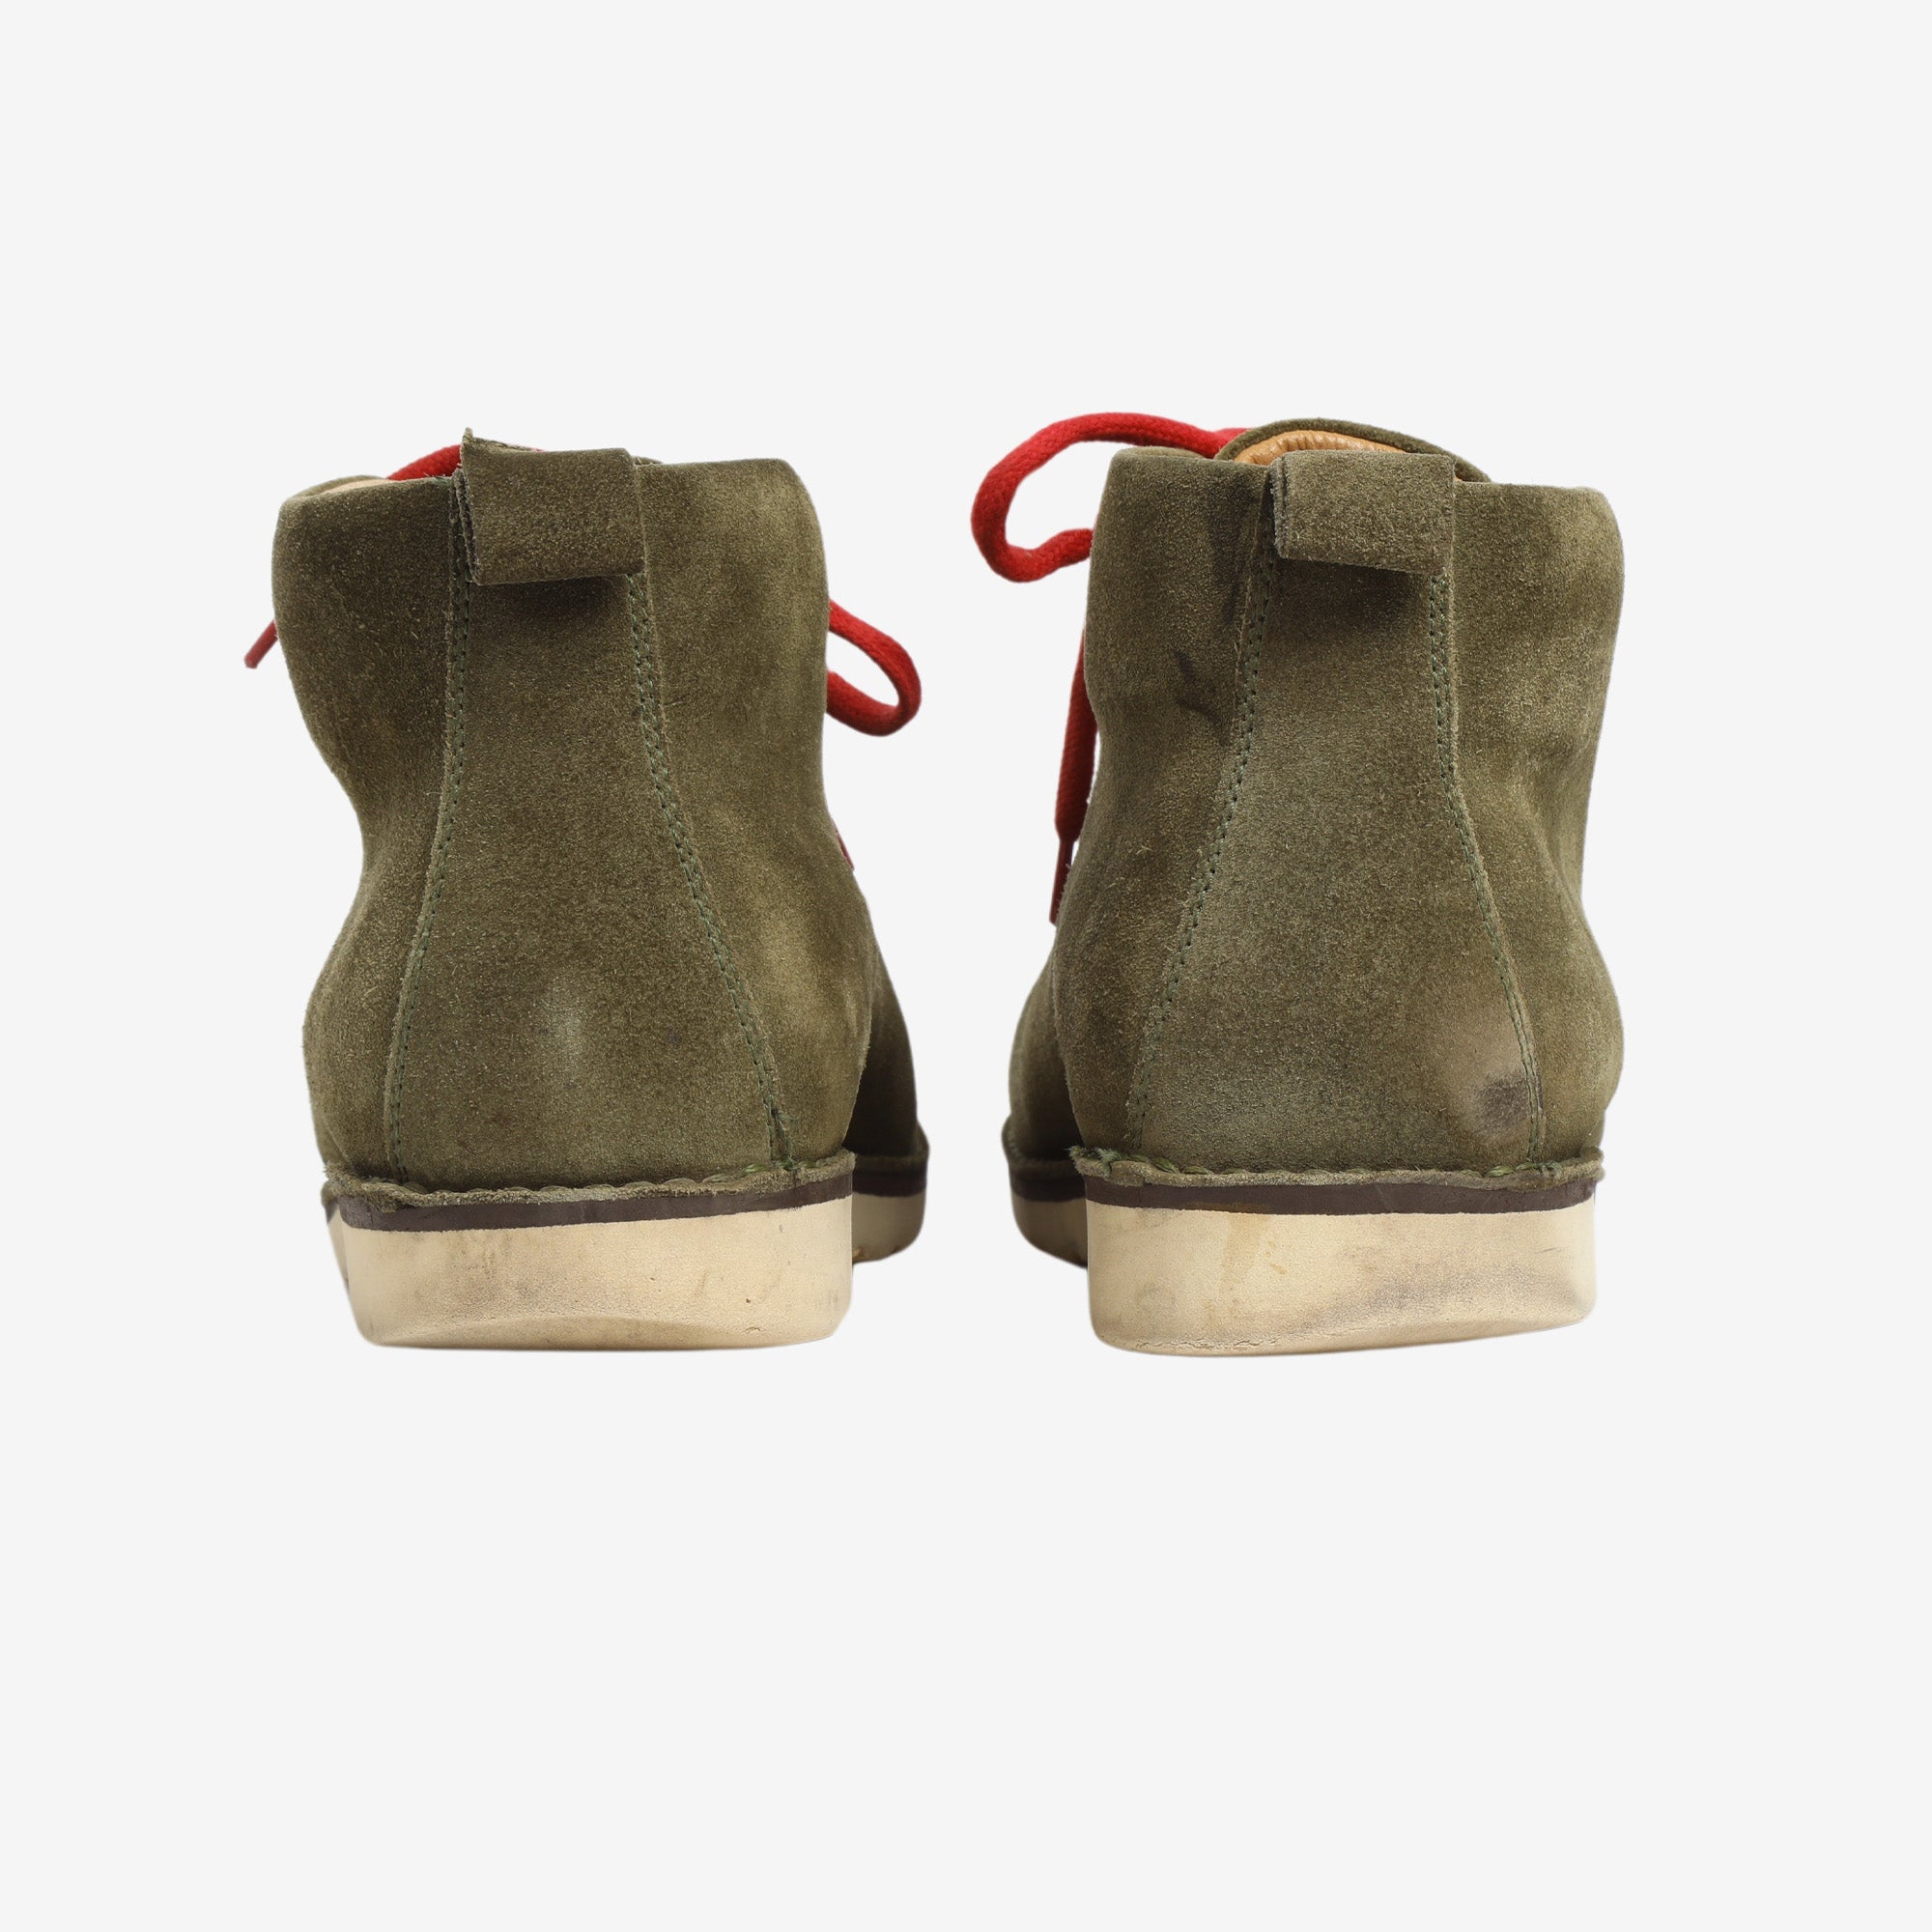 M120 Suede Boots